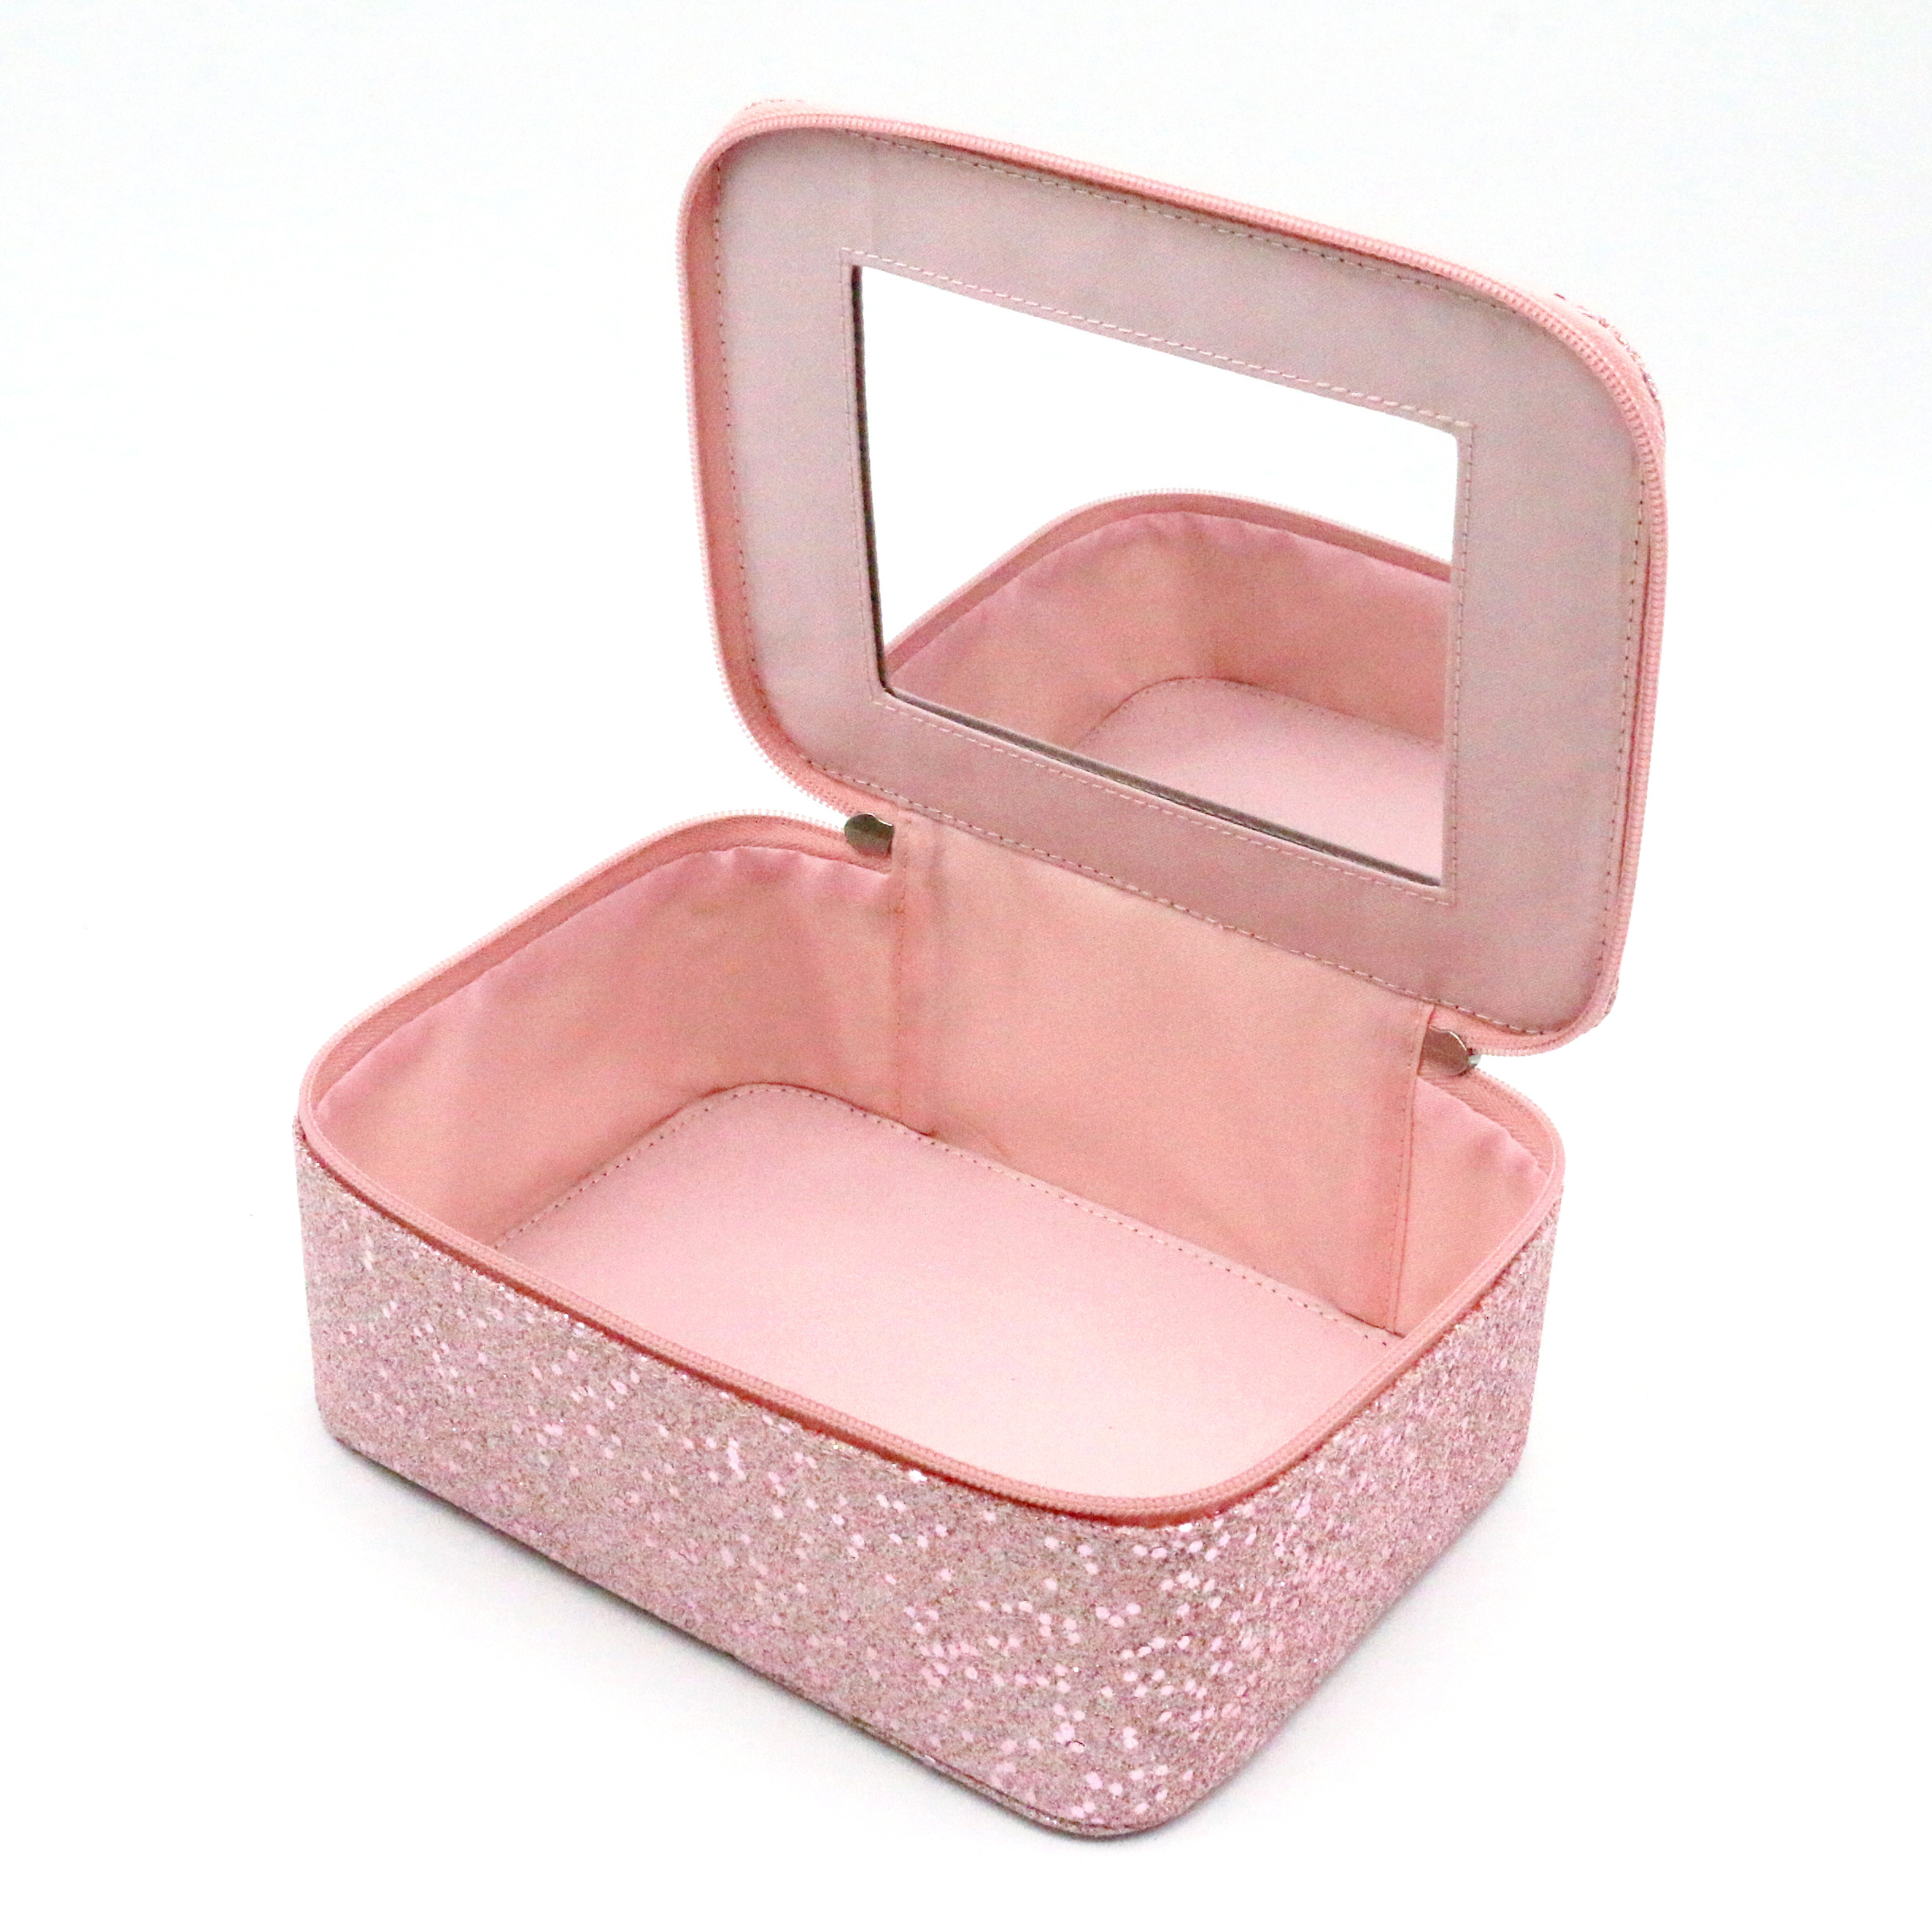 New Pink Glitter Vanity Beauty Case Luxury Glitter Mirror Makeup Organize Bag Women Large Capacity Travel Cosmetic Bags Cases